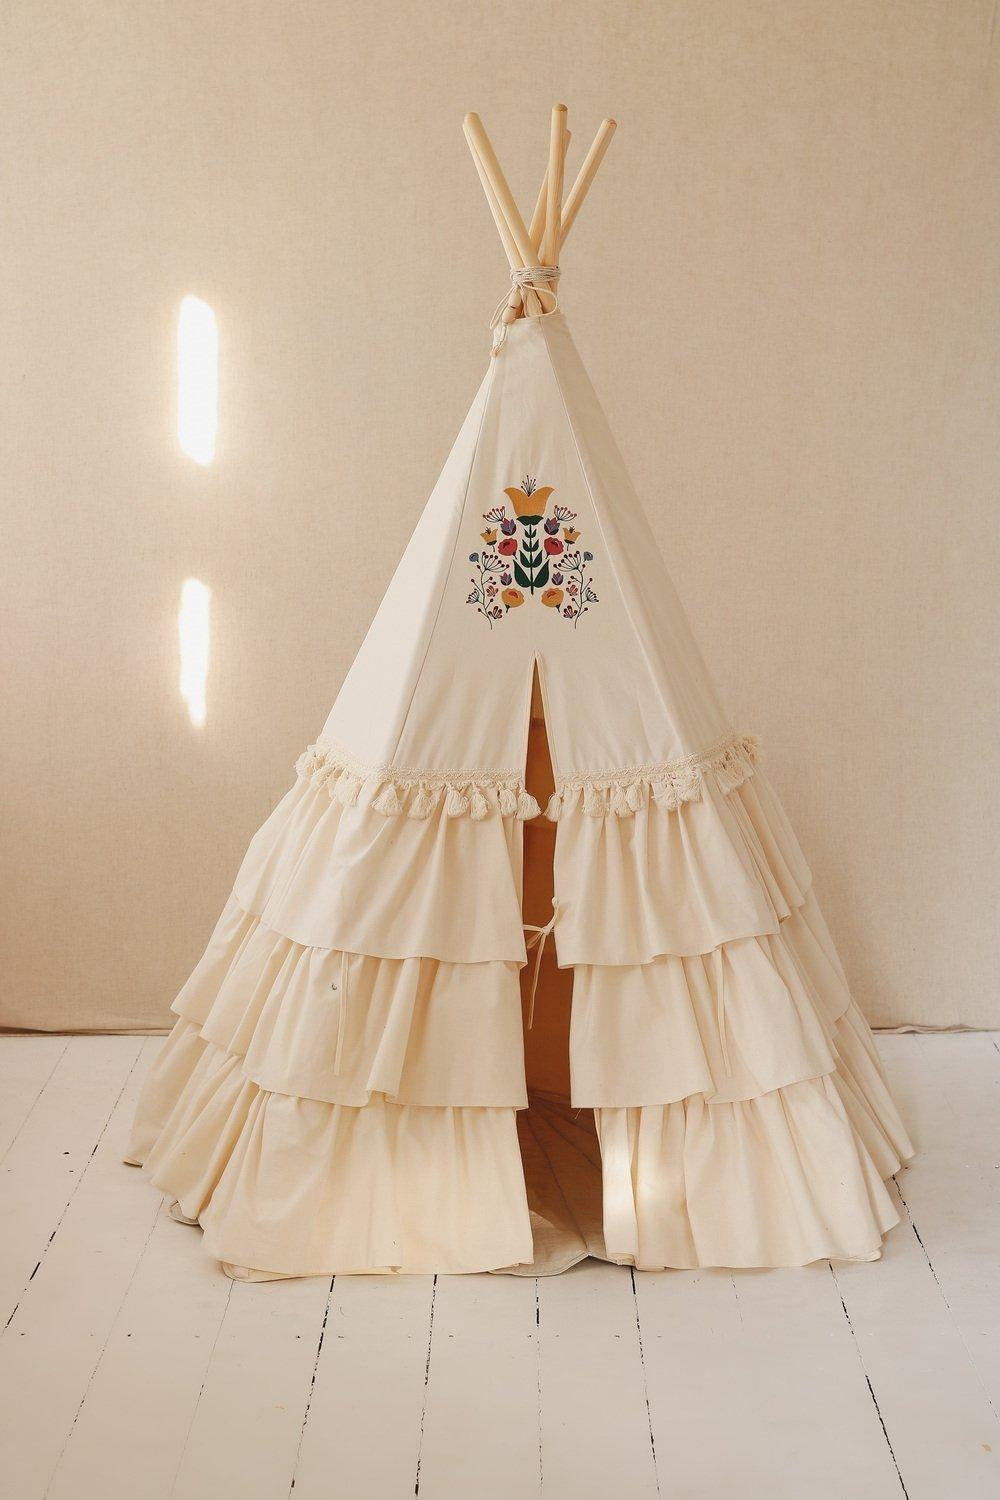 "Folk" Teepee Tent with Frills and "Marsala" Shell Mat Set